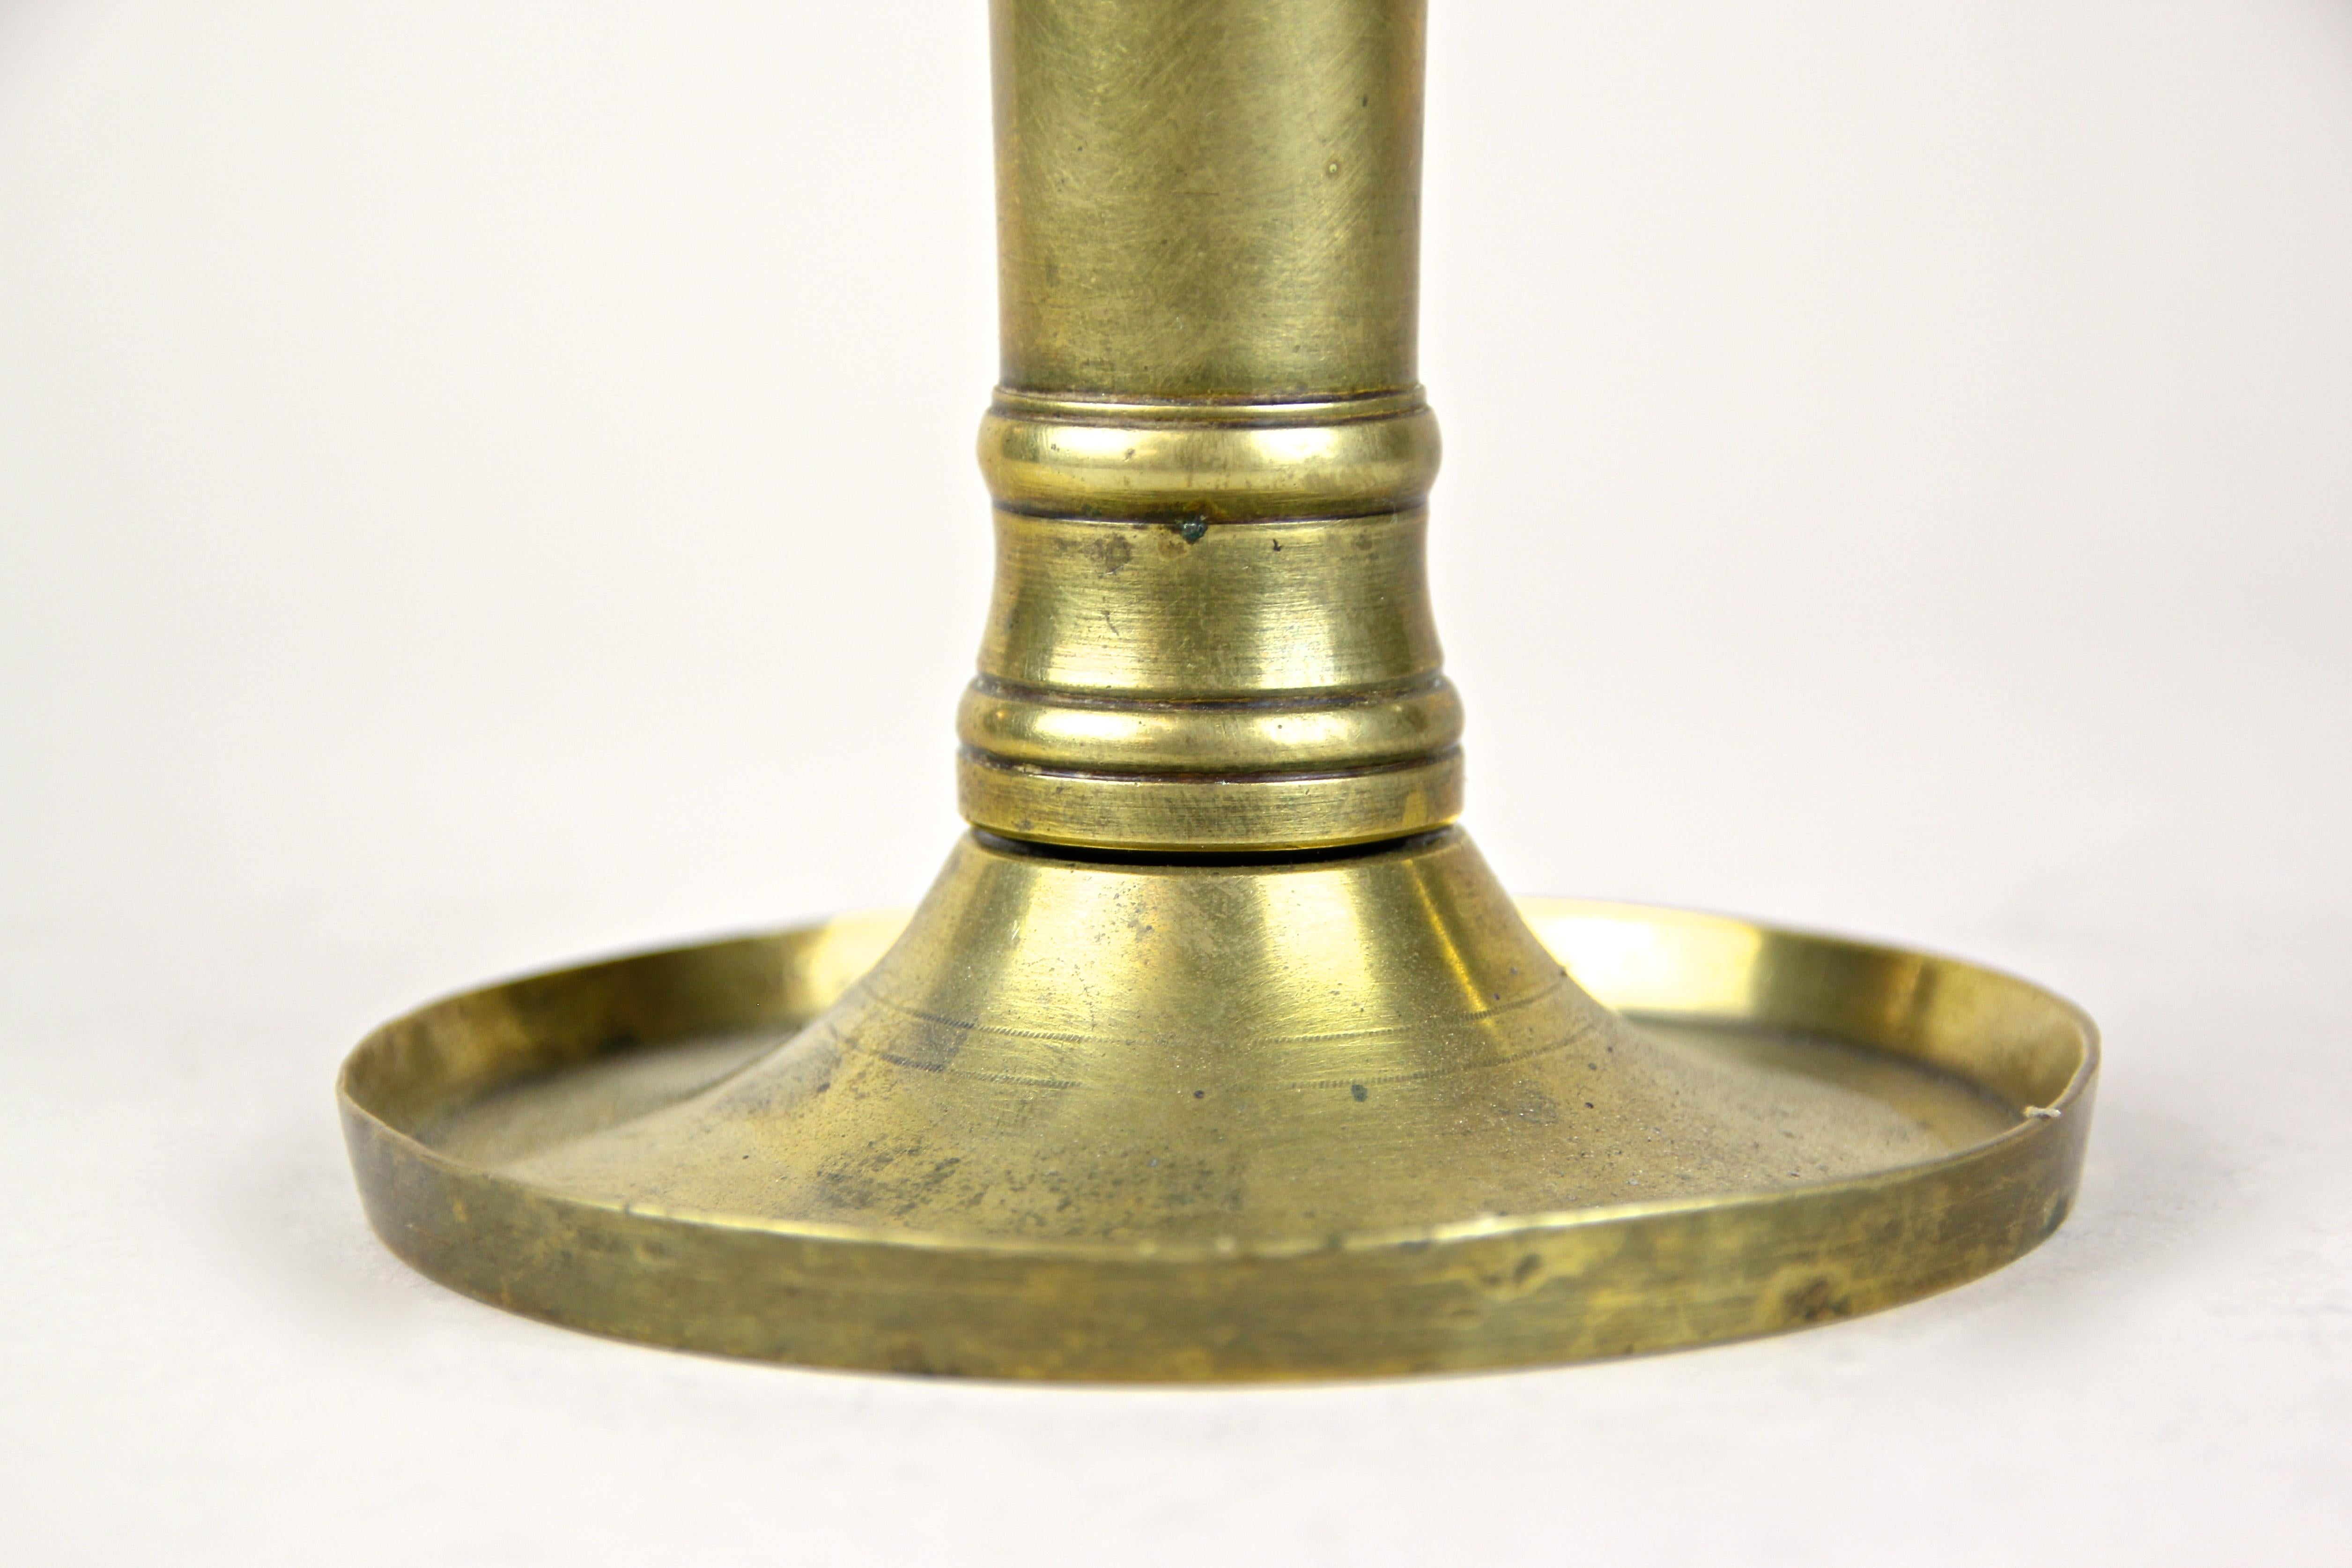 Decorative 19th century Austrian Biedermeier brass candlestick from circa 1830. A straight, clear shape, a typical attribute for the early Biedermeier period, processed of fine brass with nice details, makes this antique candlestick a very